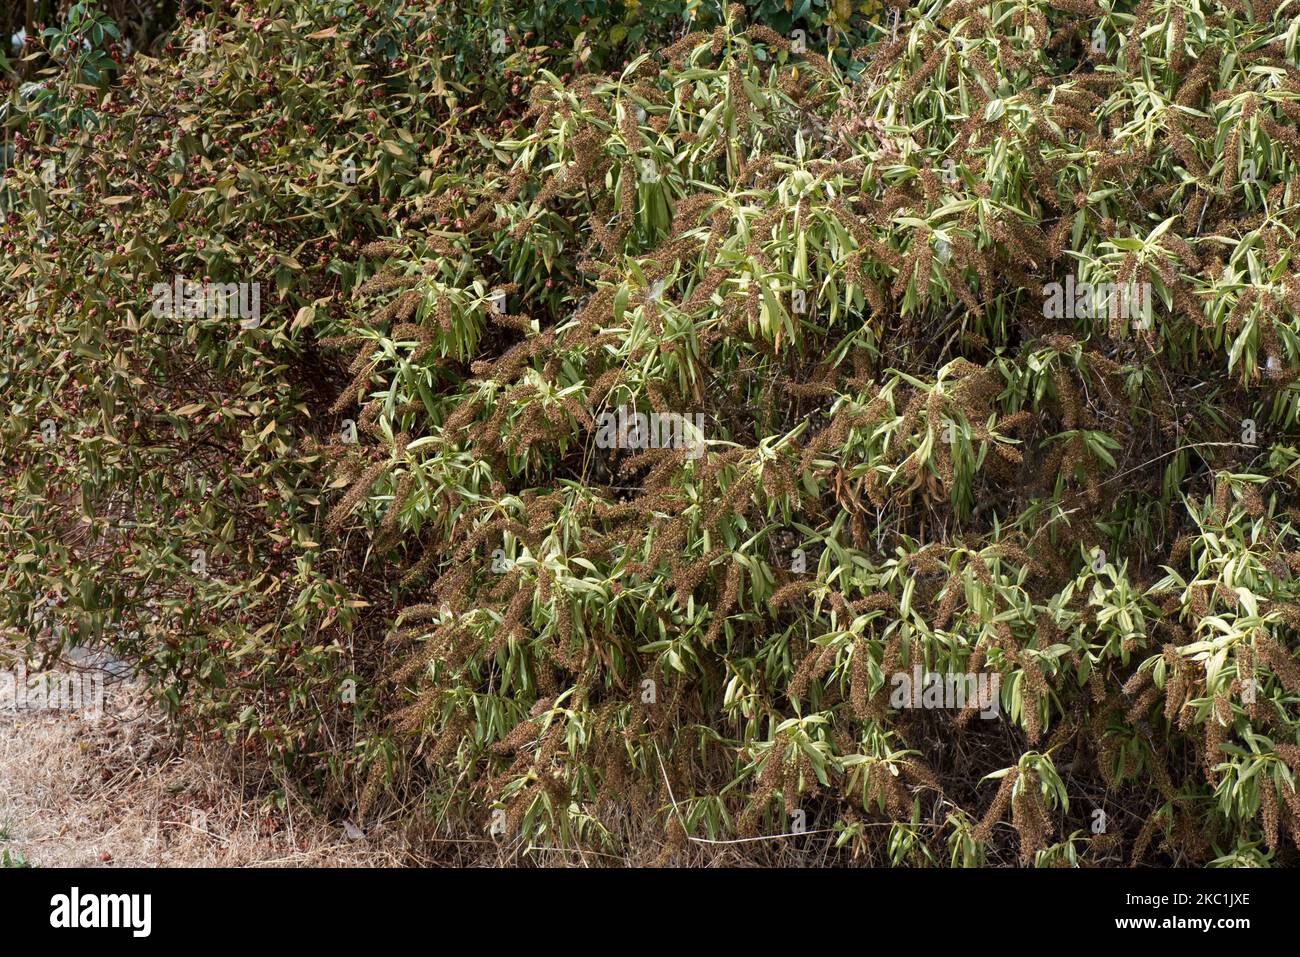 Flowering shrubs, Hebe spp. and Hypericum spp. with flowers and leaves severely damaged by hot summer drought conditions, Berkshire, August 2022 Stock Photo